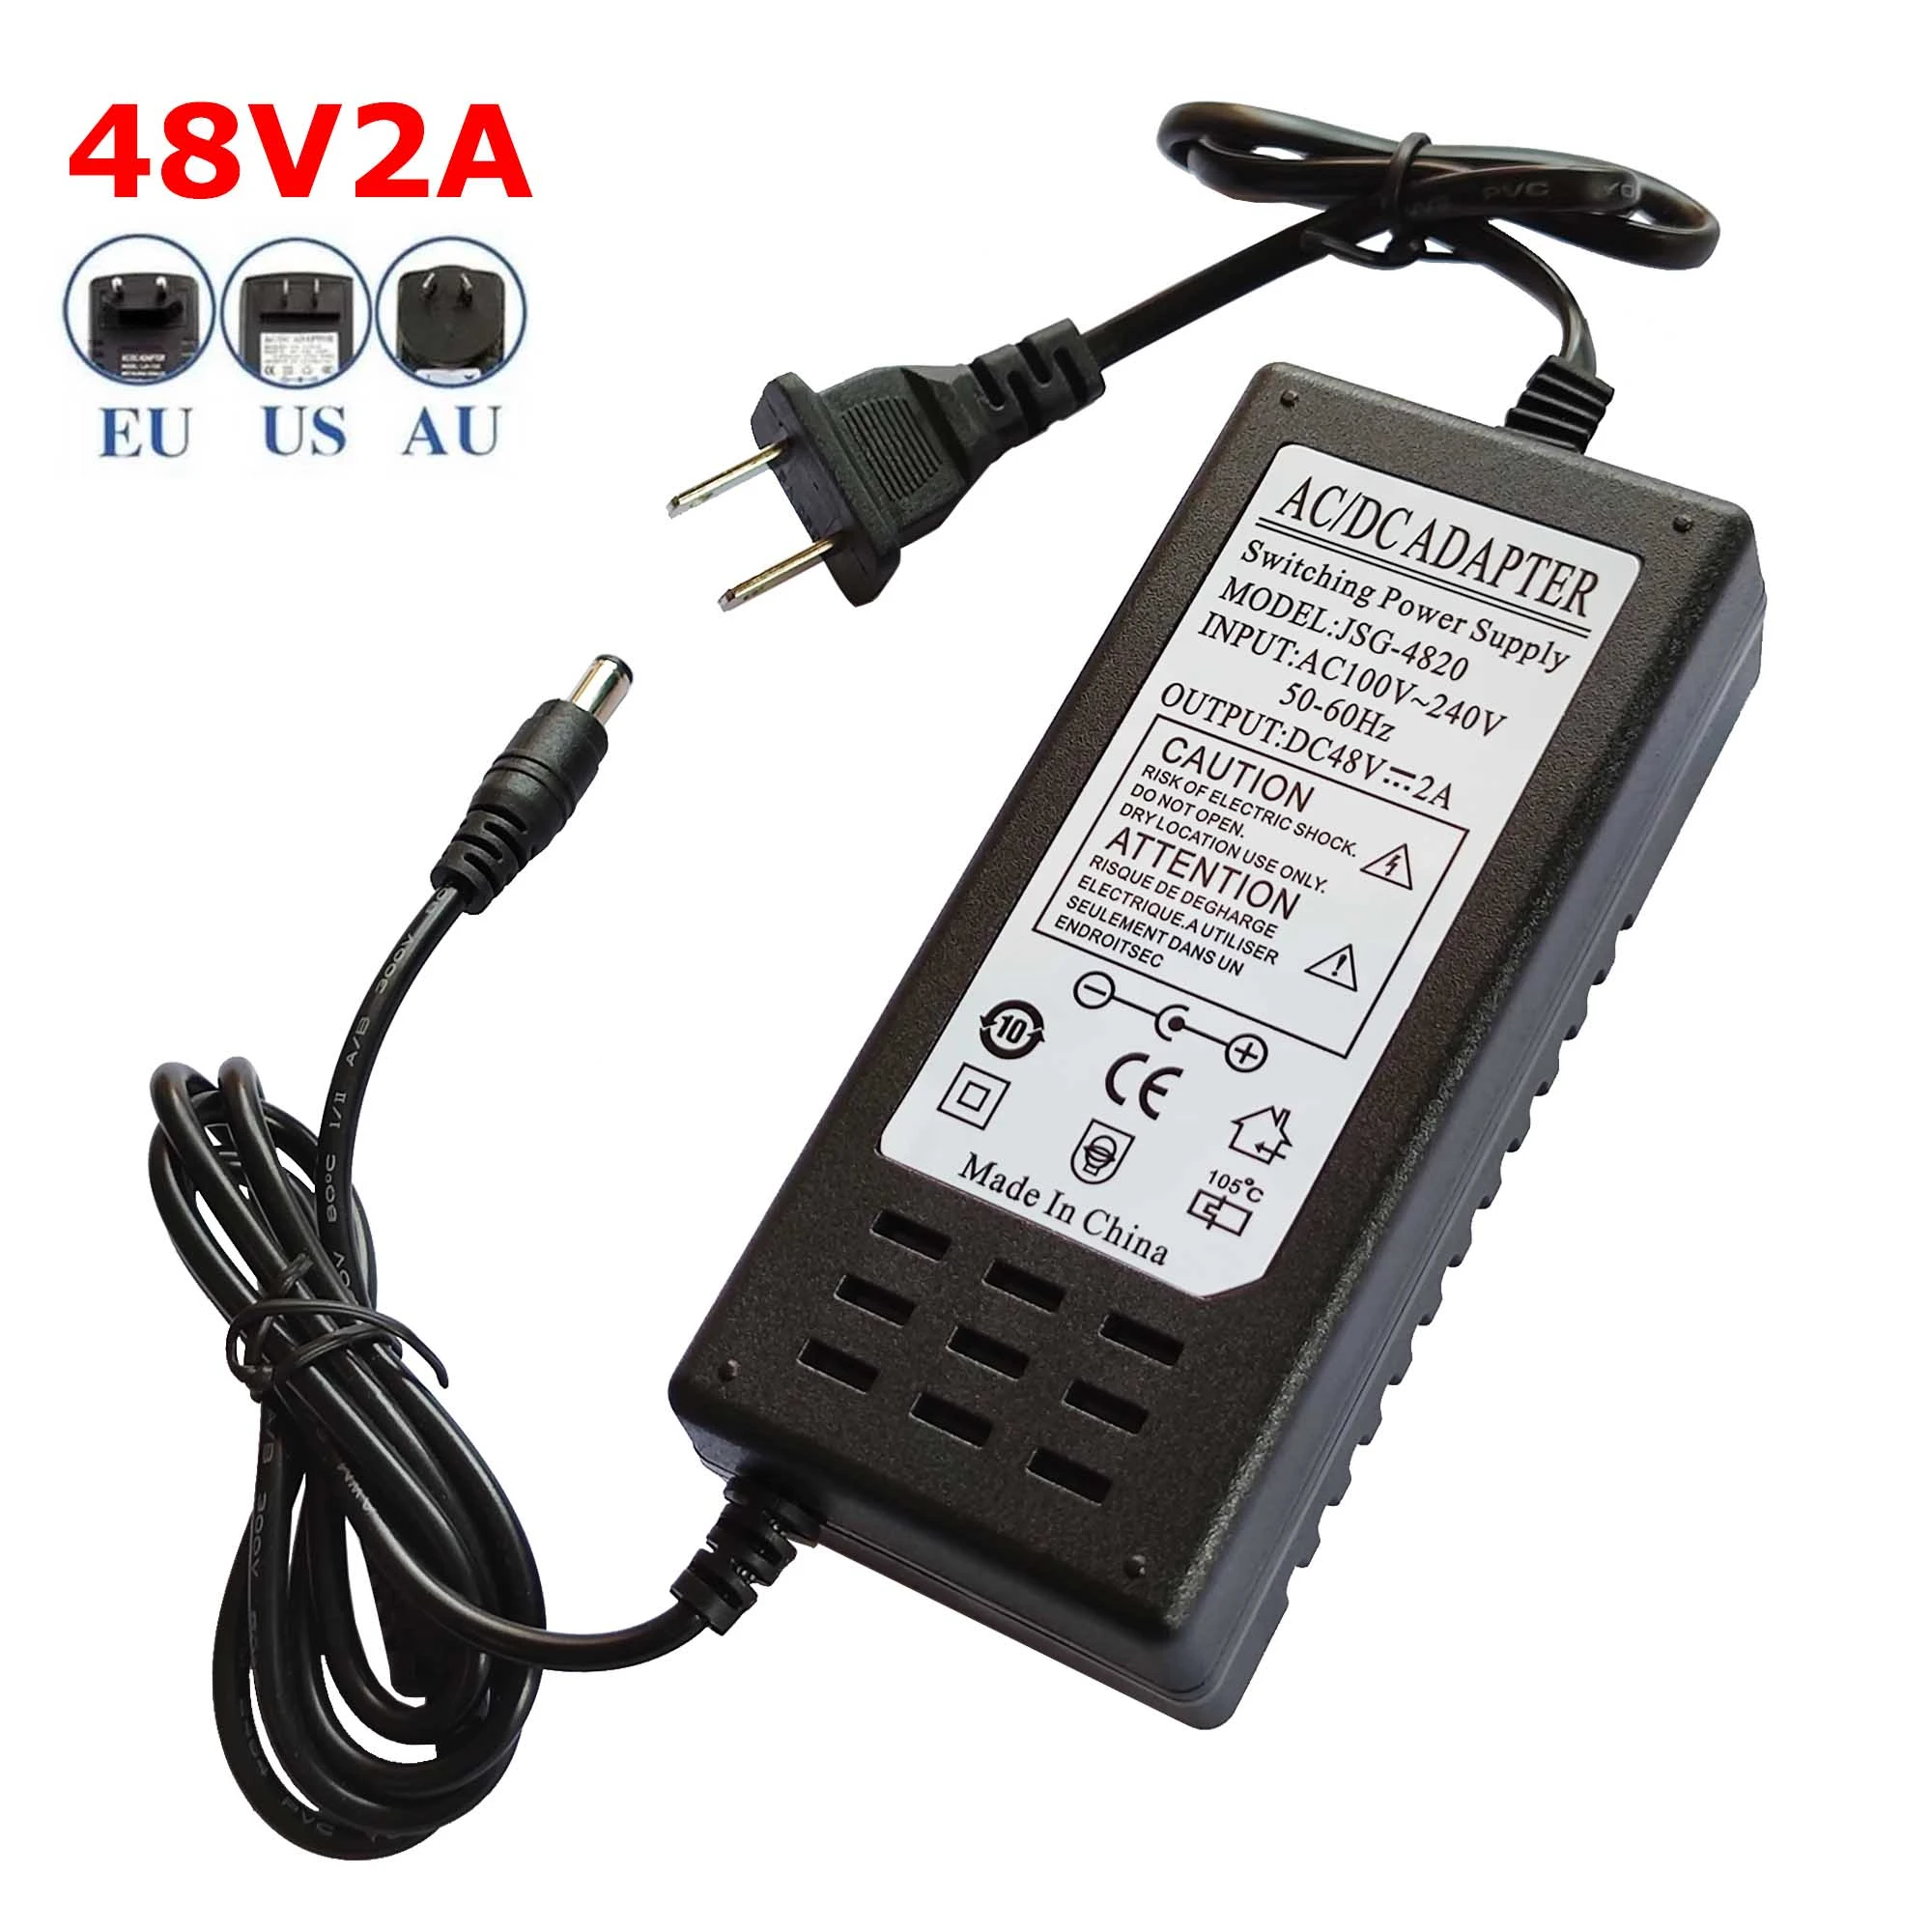 100-240V AC To DC 48V 2A  Power Adapter Supply Charger Adapter 5.5mm X 2.5mm Plug US EU AU Plug 48V/2A 5.5mm X 2.1mm